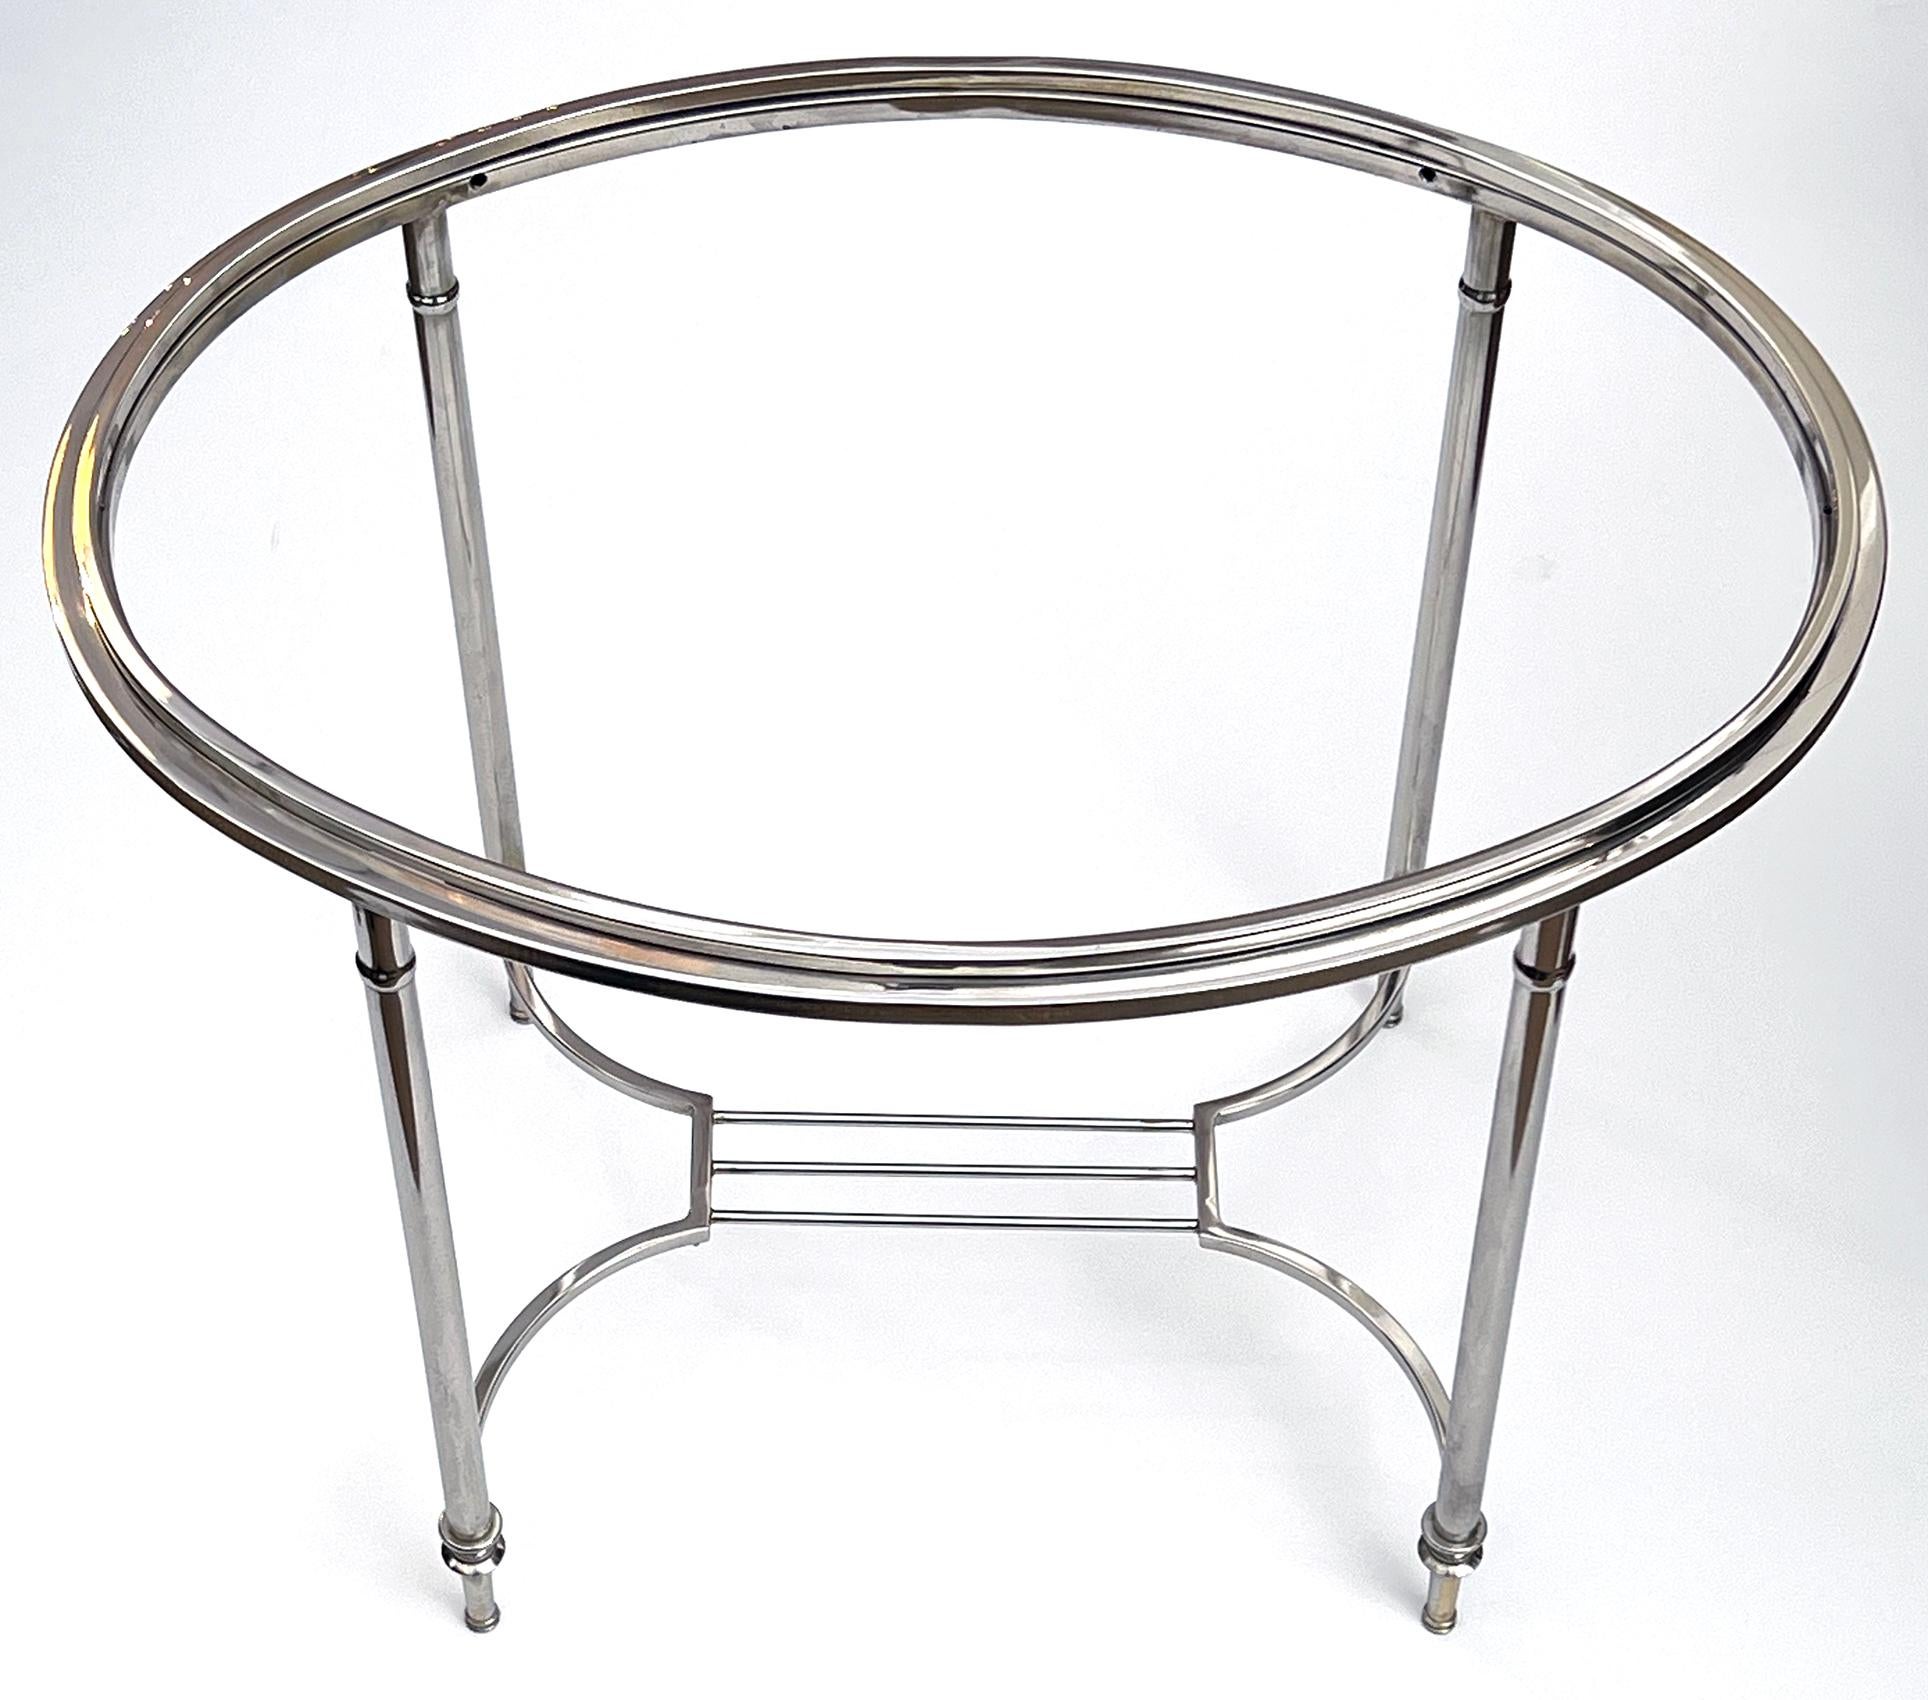 Mid-20th Century French Art Deco Nickel-plated Oval Side Table in the Style of Maison Jansen For Sale